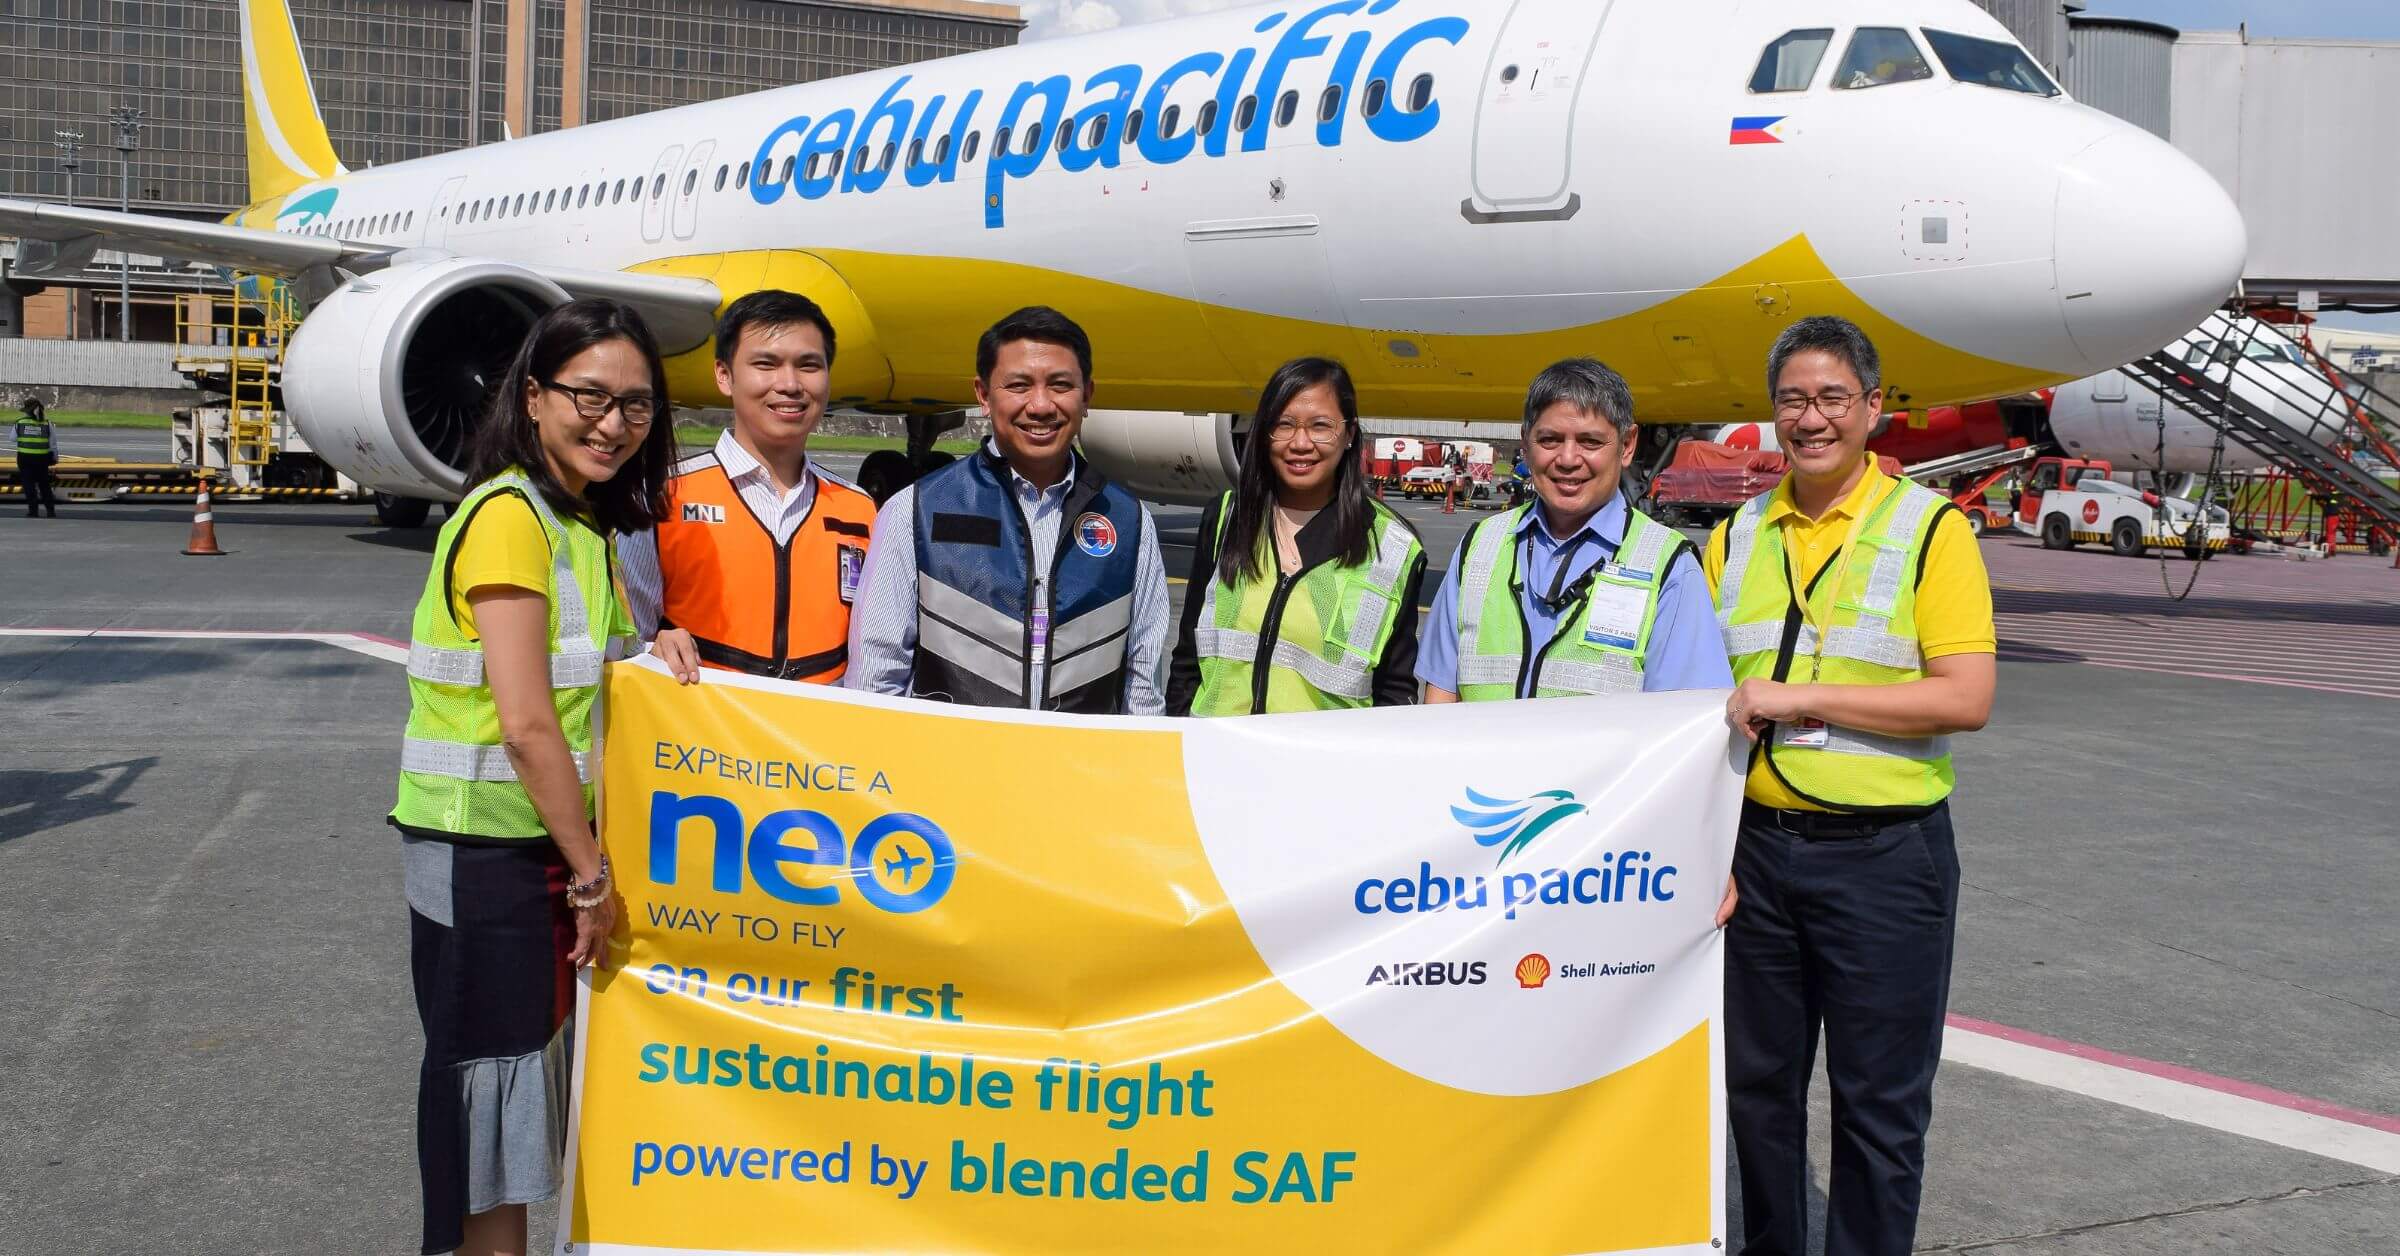 SUSTAINABLE AVIATION FUEL. (From left) Candice Iyog, VP for Marketing and Customer Experience, CEB; Bryan Co, Senior Assistant General Manager, MIAA; Cesar Chiong, General Manager, MIAA; Atty. Clarabel Anne R. Lacsina, Attorney IV, Acting Board Secretary, CAB; Capt. Florendo Jose Aquino III, Acting Chief of the Flight Operations Department, CAAP; Xander Lao, Chief Commercial Officer, CEB mark the Singapore to Manila passenger flight powered by sustainable aviation fuel (SAF).